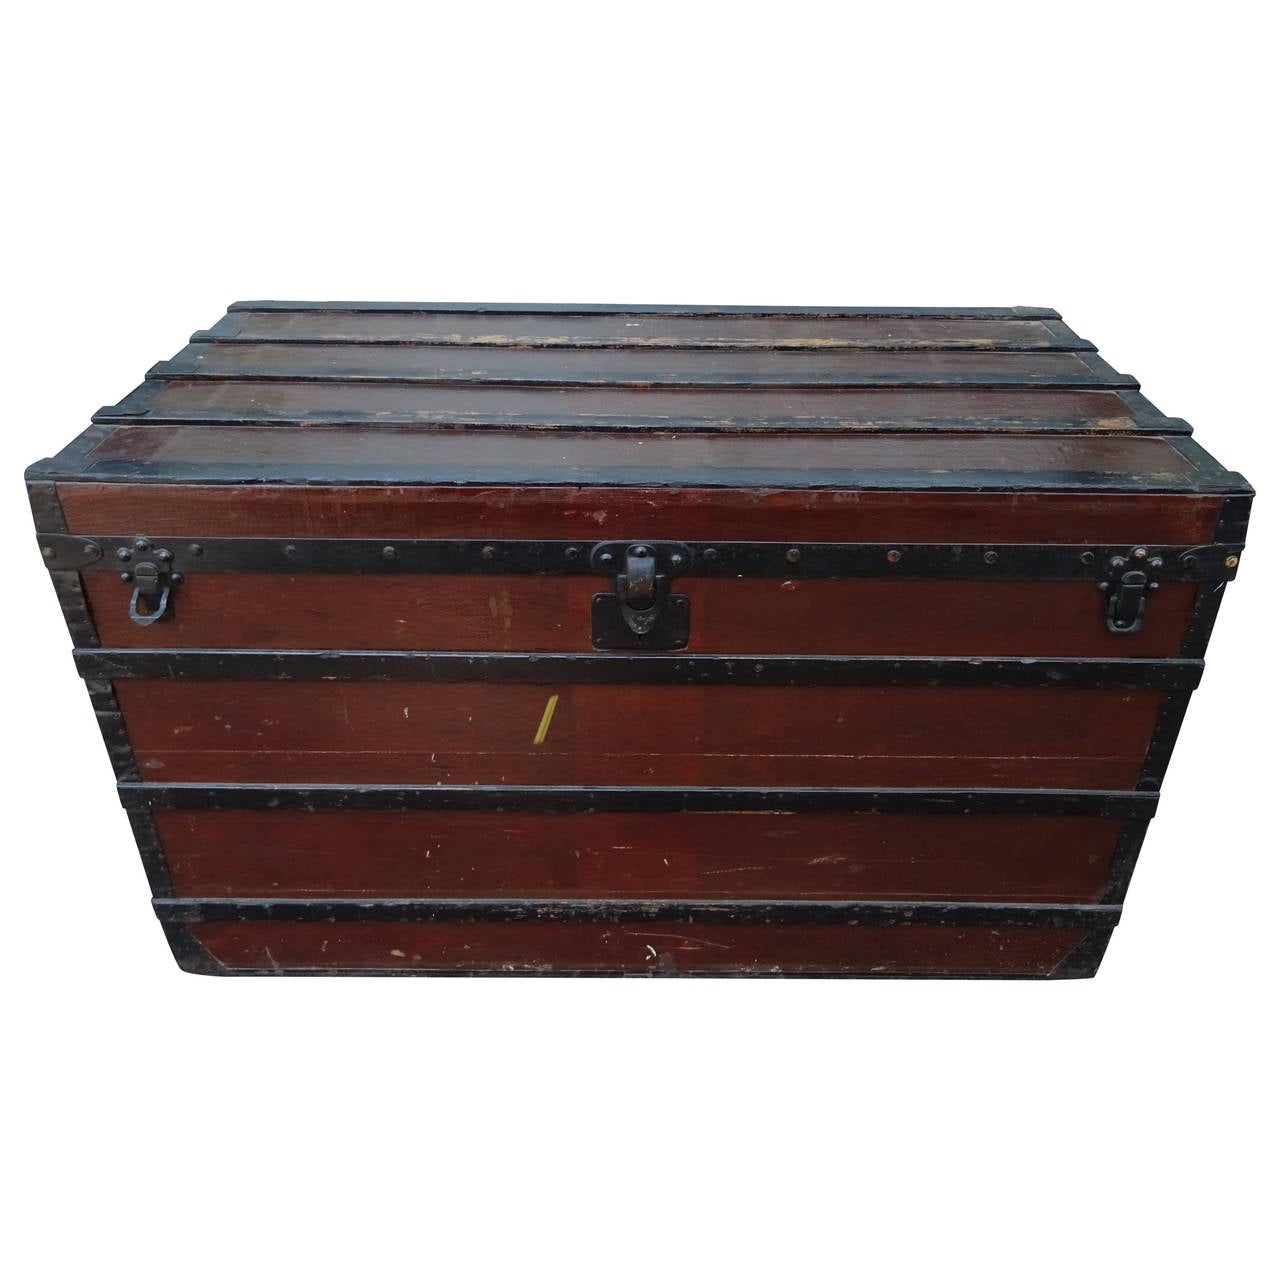 Large Early Louis Vuitton Trunk For Sale at 1stdibs